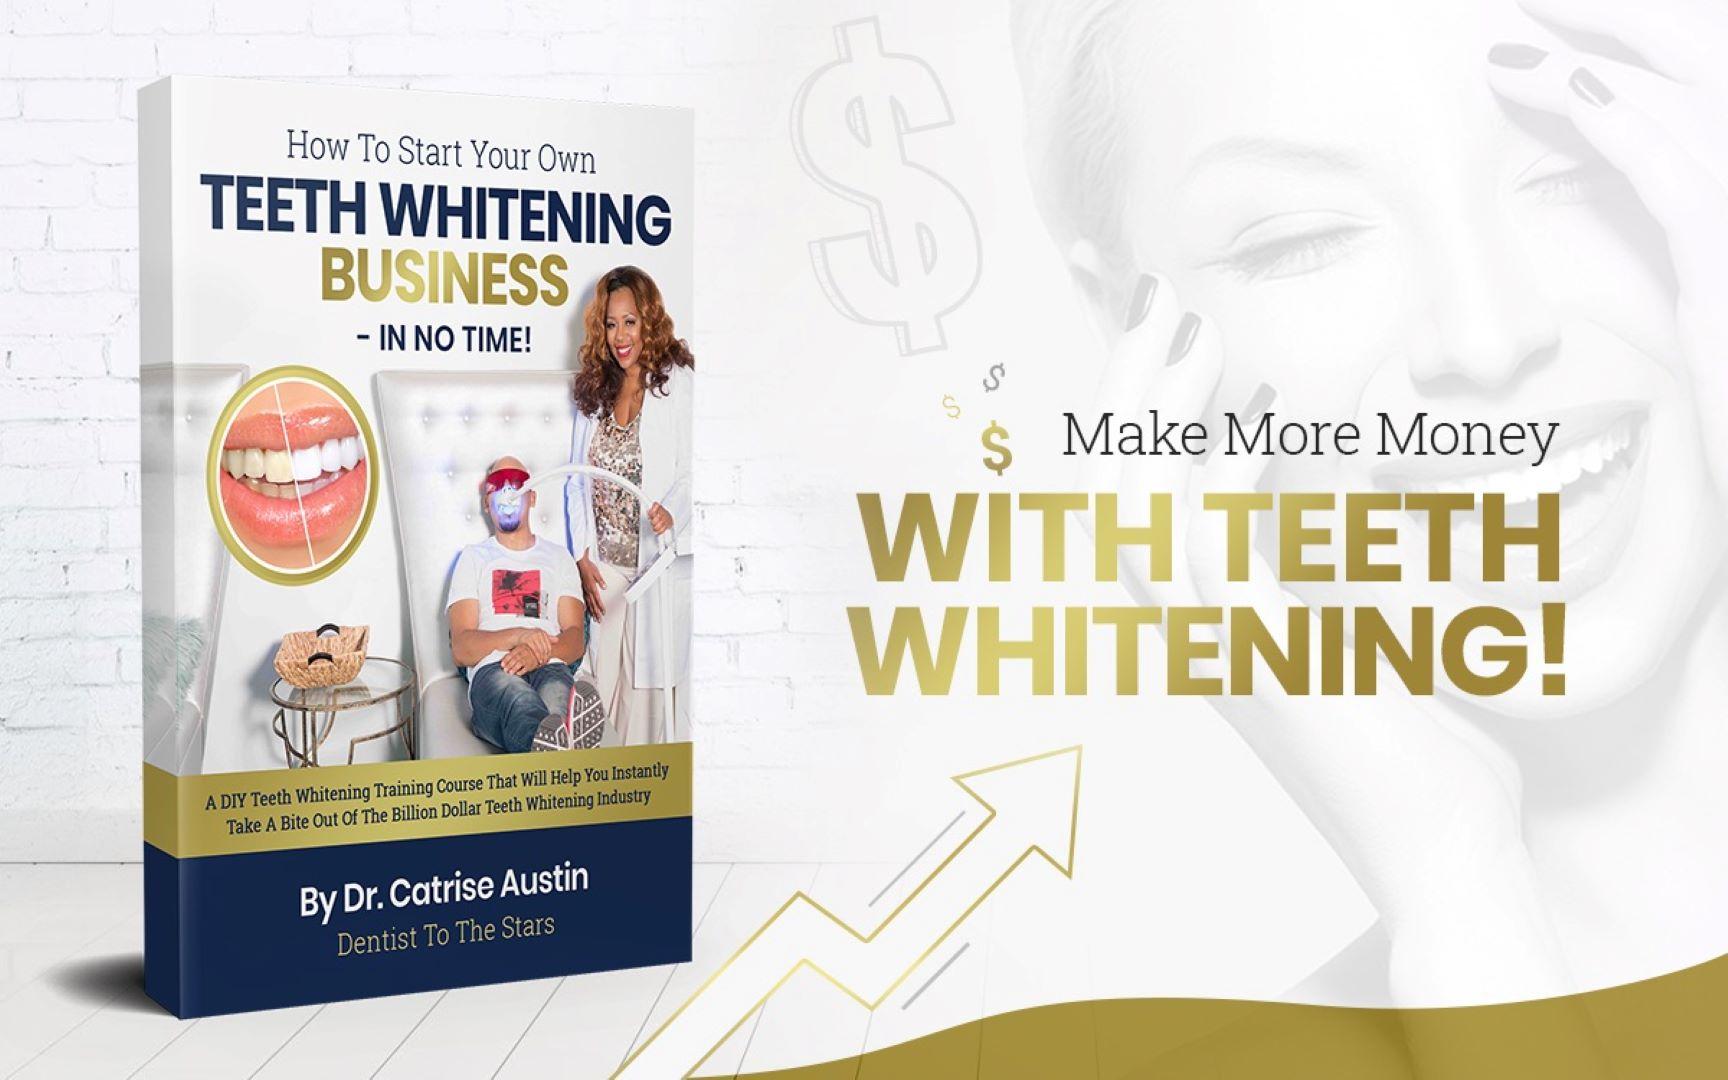 How To Start Your Own Teeth Whitening Business Live Certification - NJ